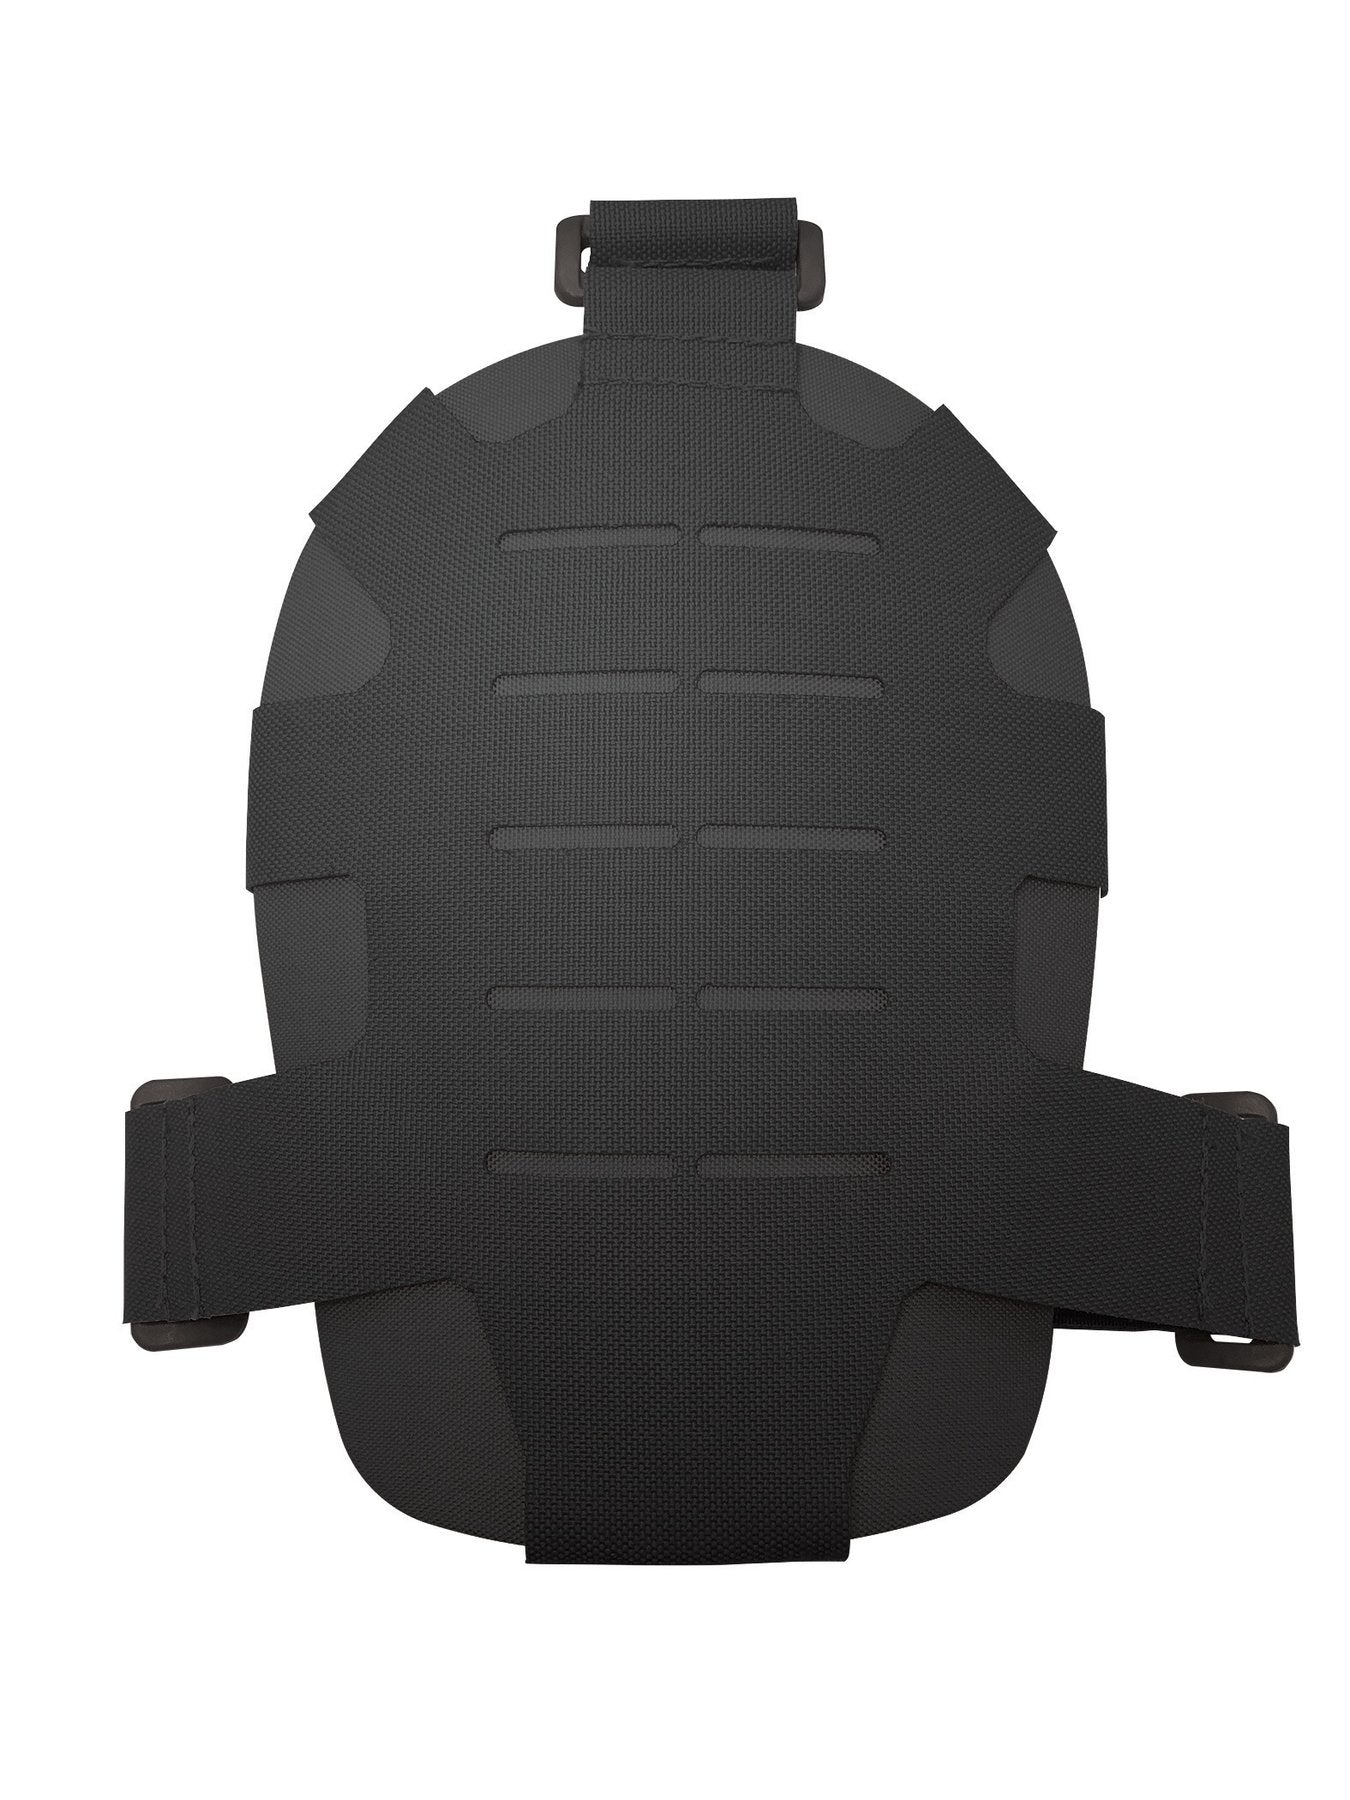 Hoplite Armor Two Rogue Shoulder Plate Carriers